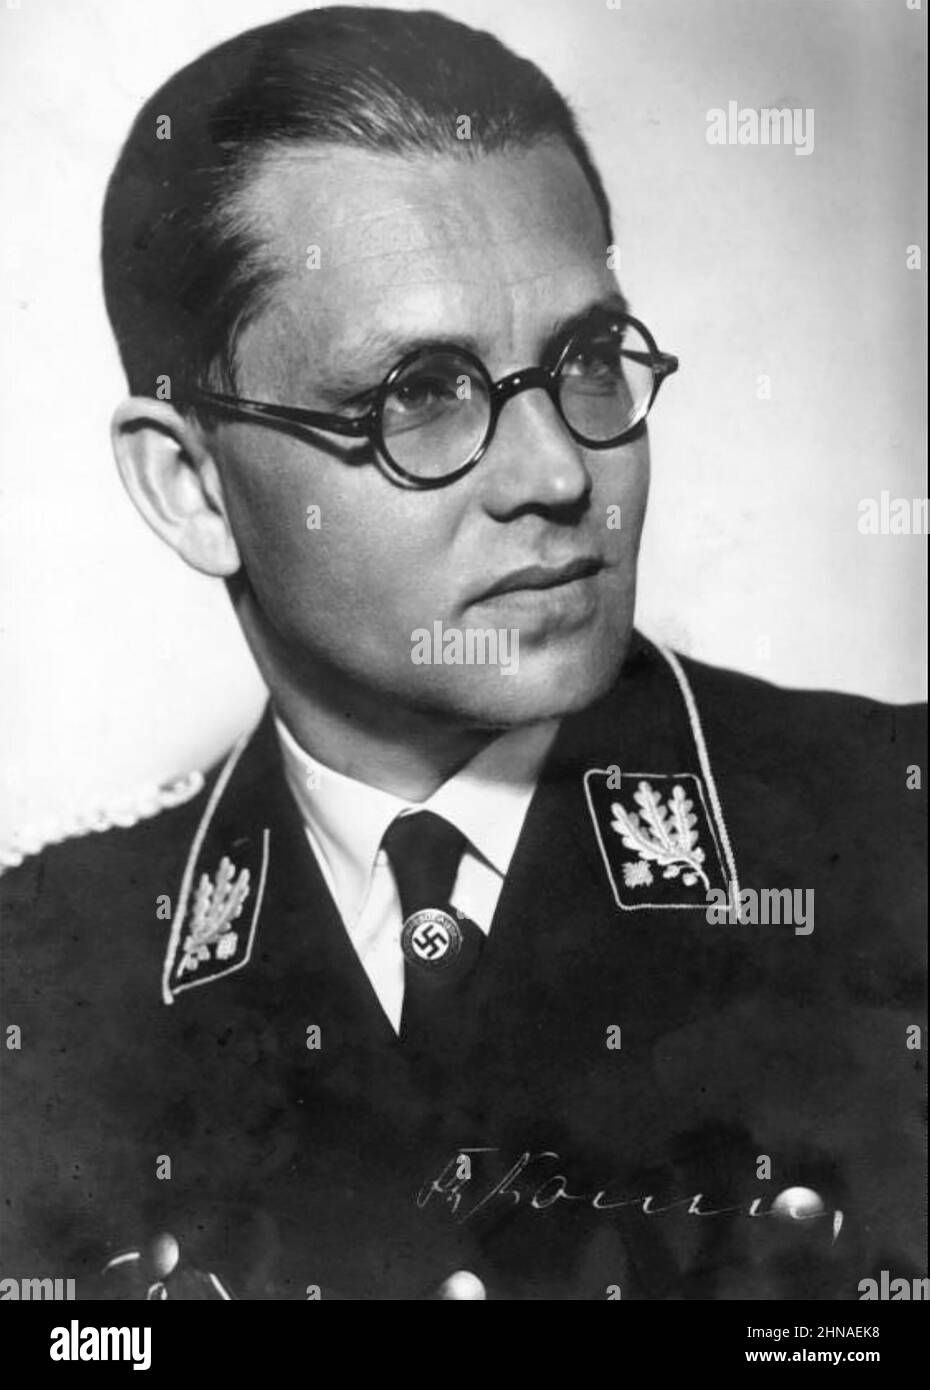 PHILIP BOULER (1899-1945) Senior Nazi party official and SS member responsible for the Aktion T4 killings. Stock Photo